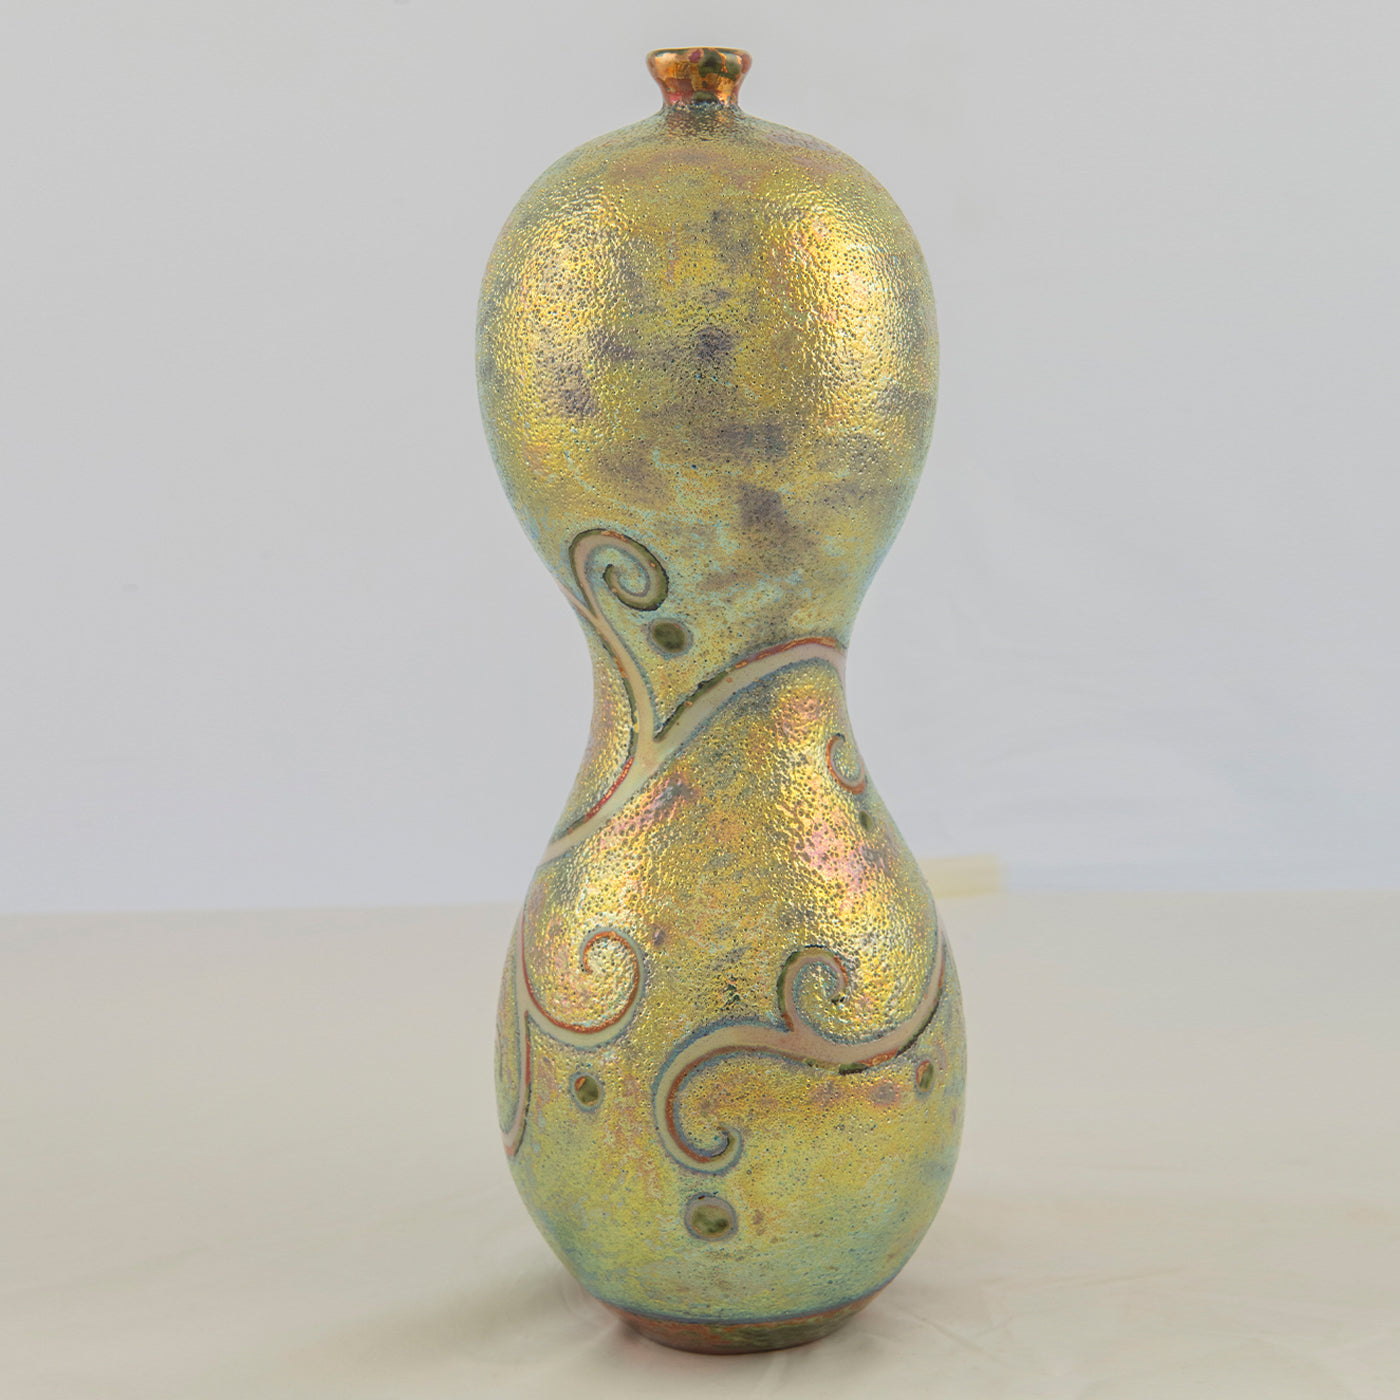 Hourglass-Shaped Iridescent Polychrome Lustre Vase with Shoots - Alternative view 1